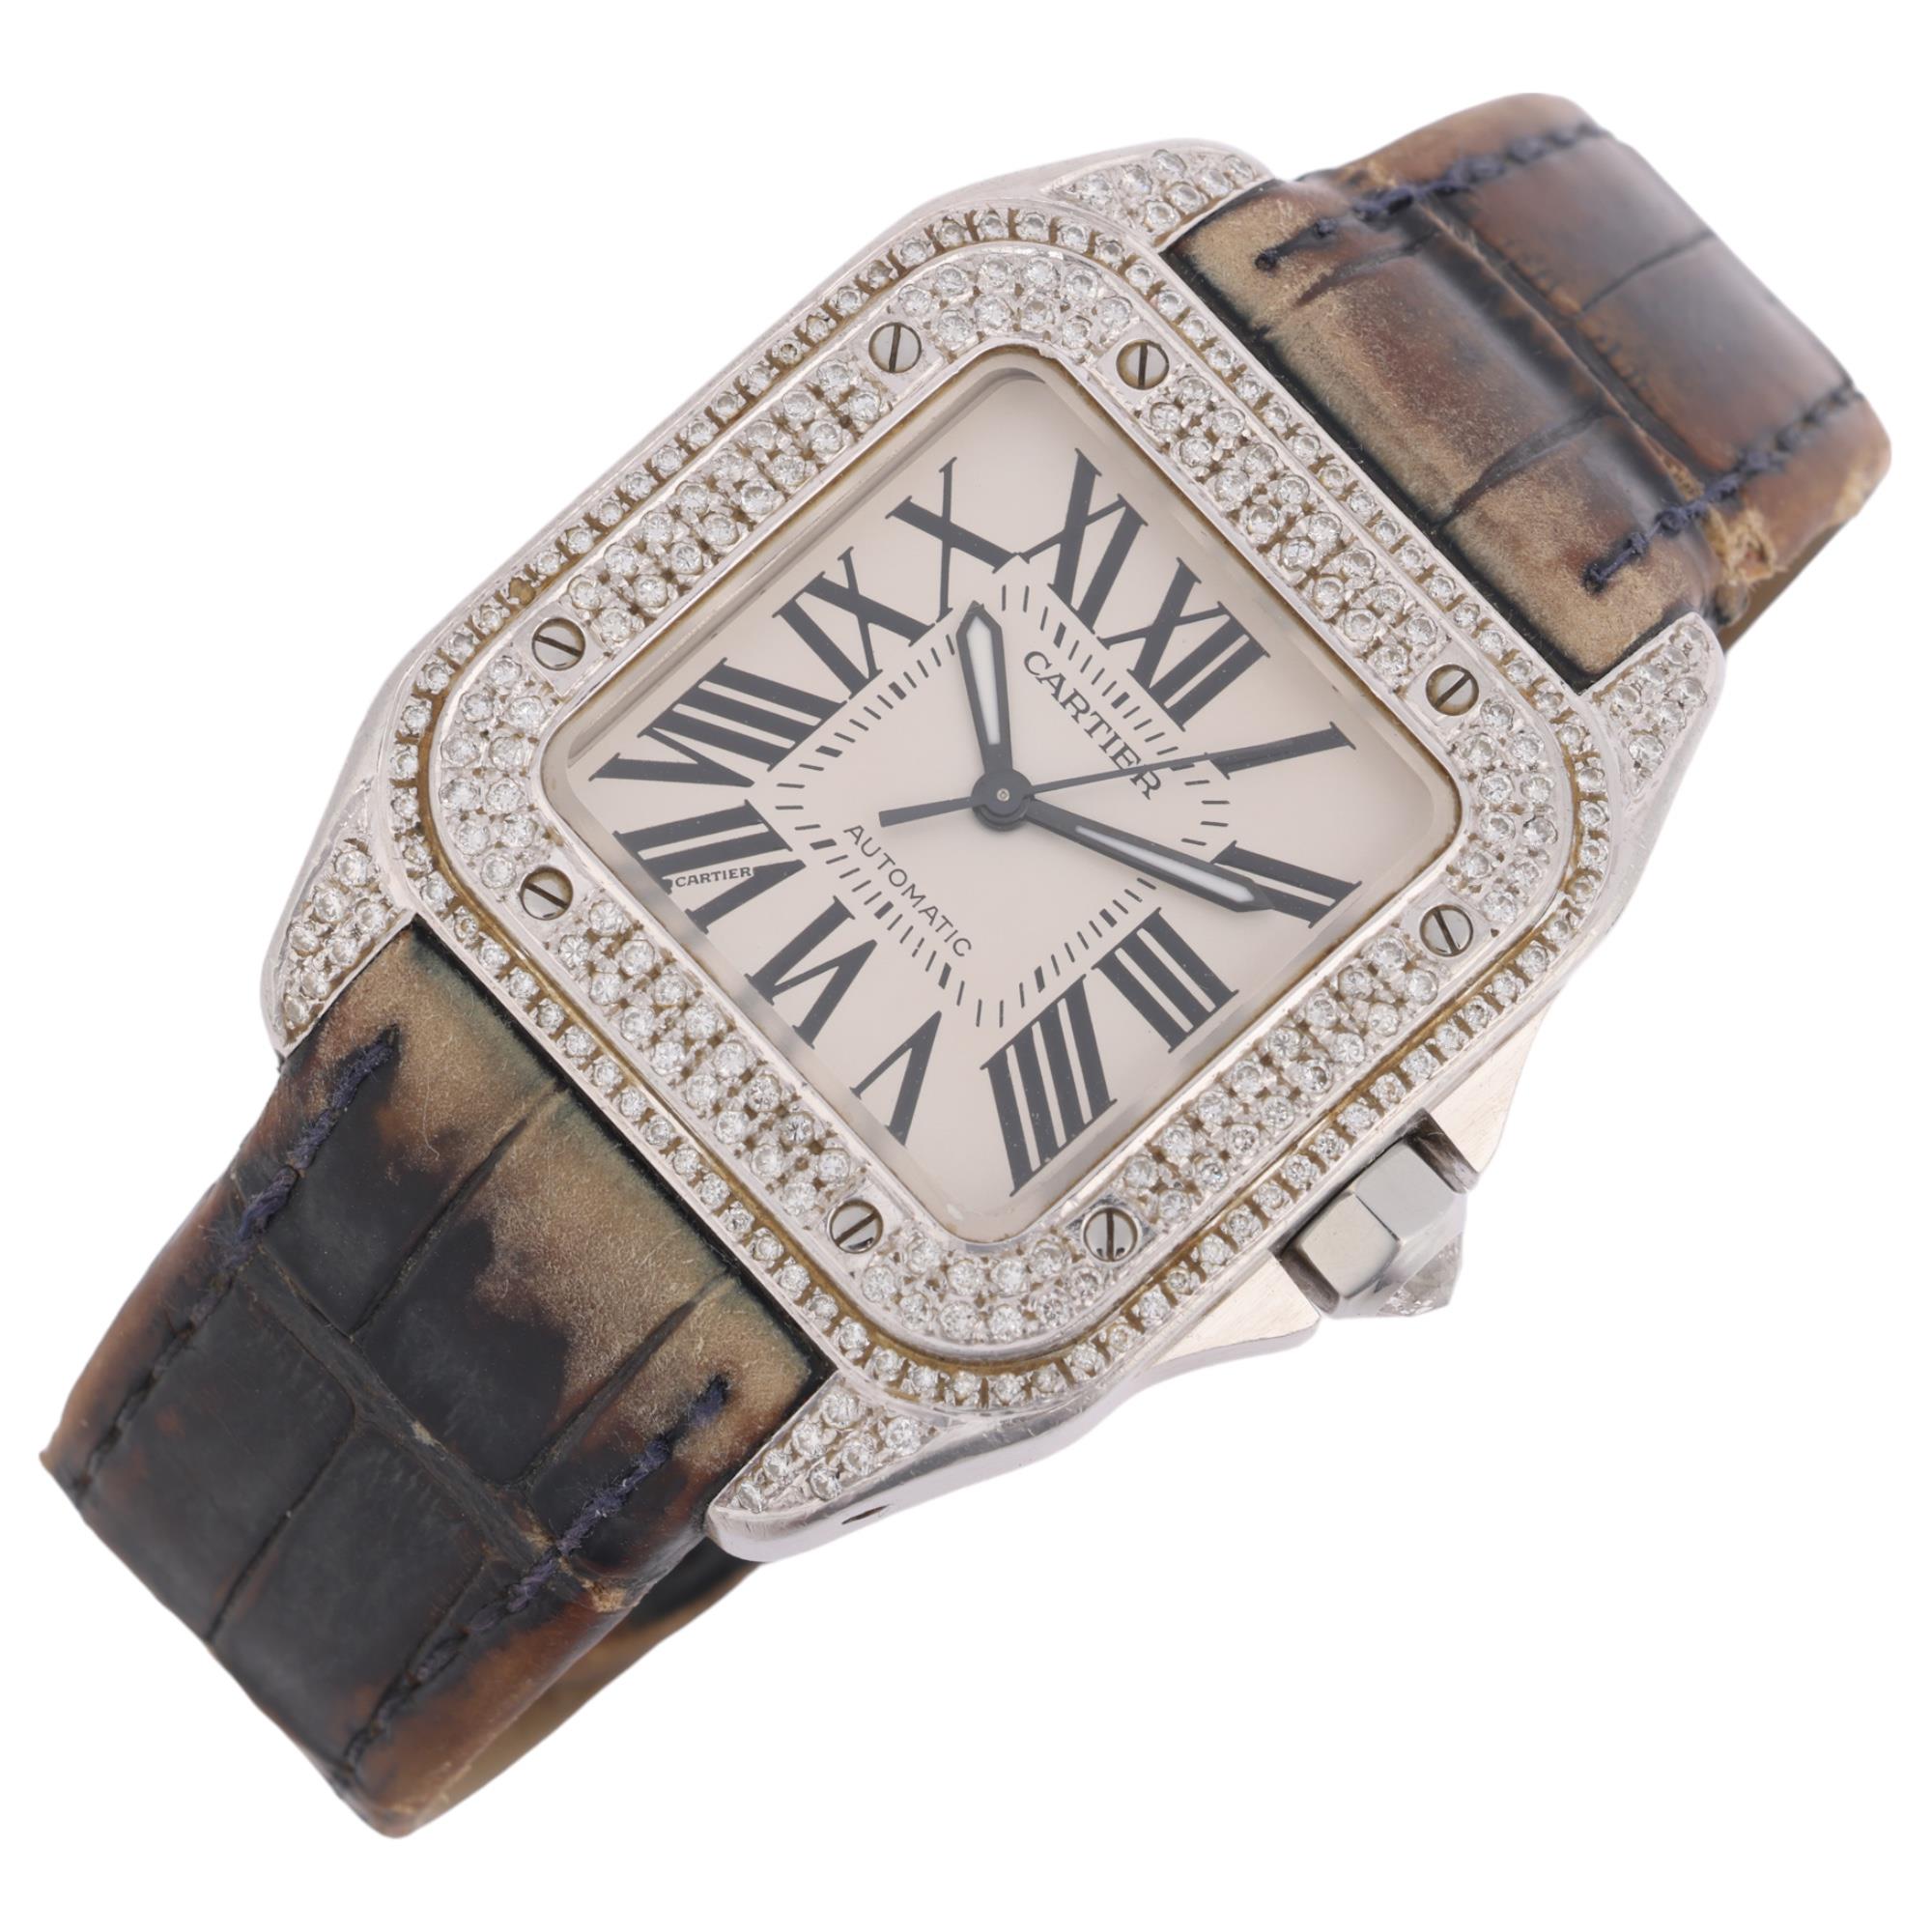 CARTIER - a stainless steel and diamond Santos 100 automatic wristwatch, ref. 2878, silvered dial - Image 2 of 5